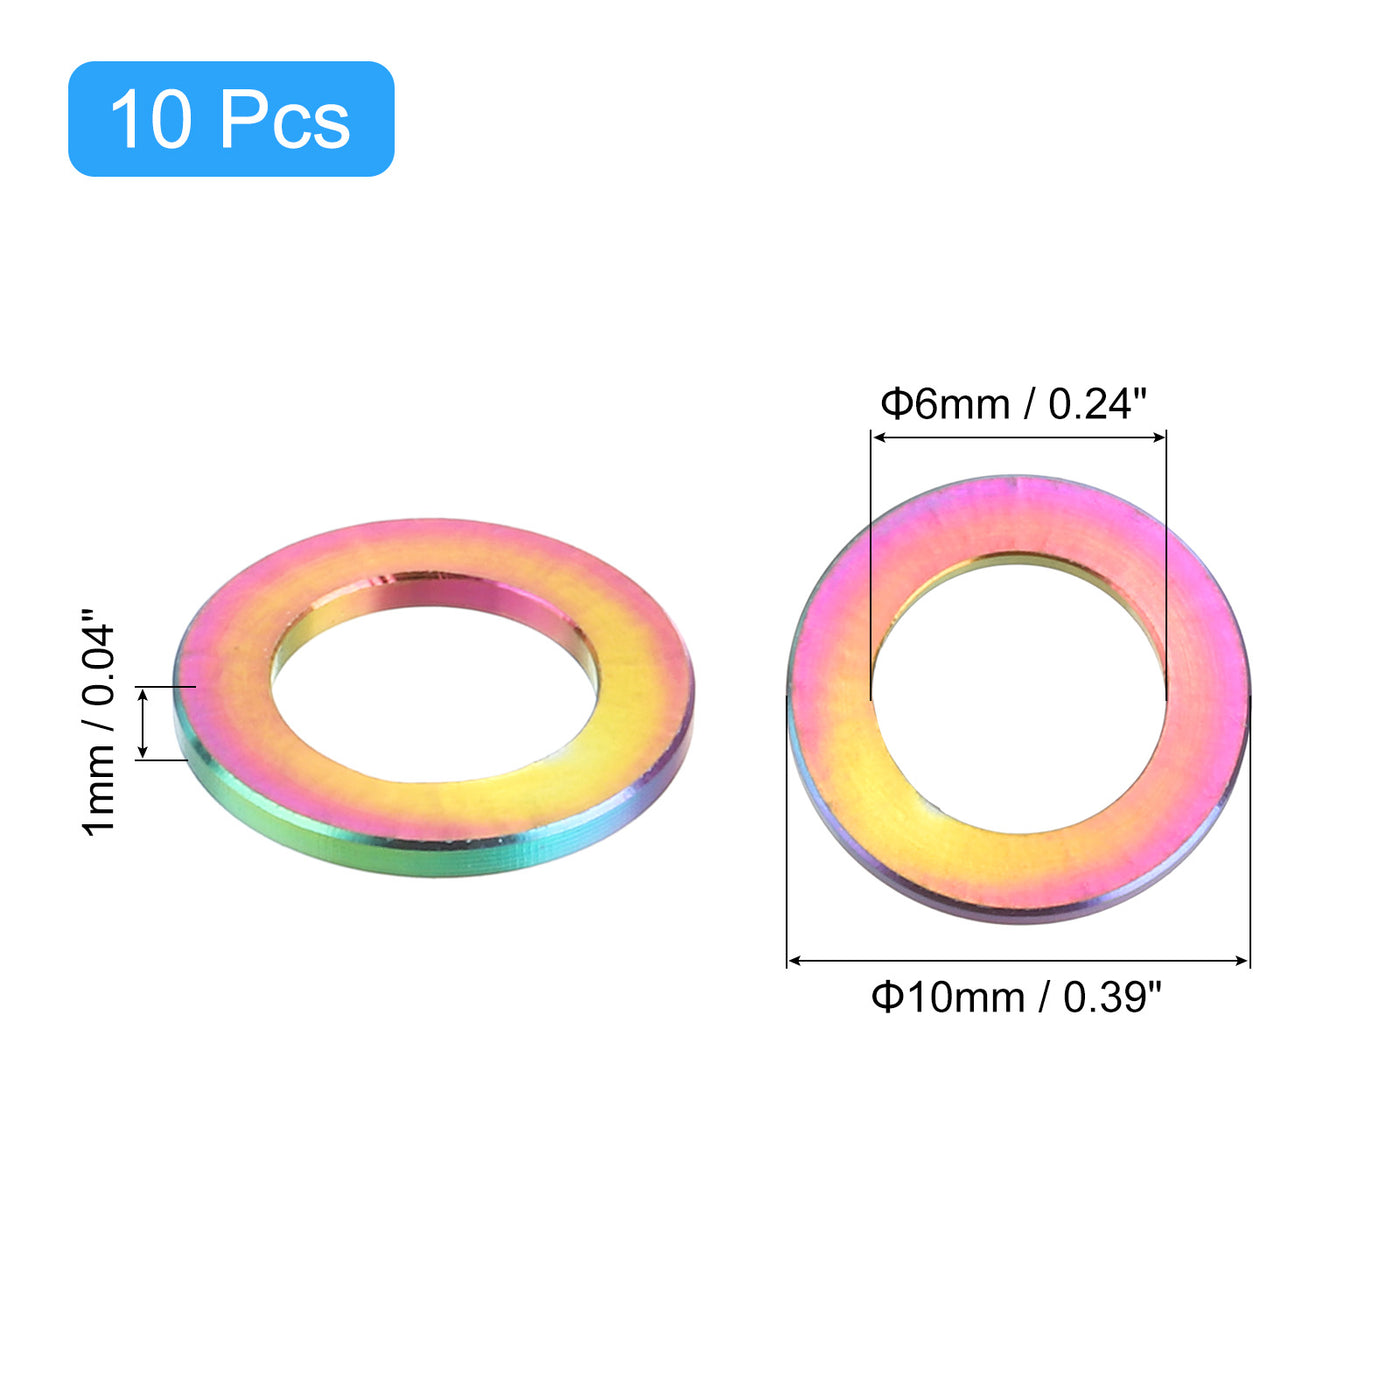 uxcell Uxcell 10 Pcs M6 Titanium Flat Washer Metric Flat Washer Multicolor